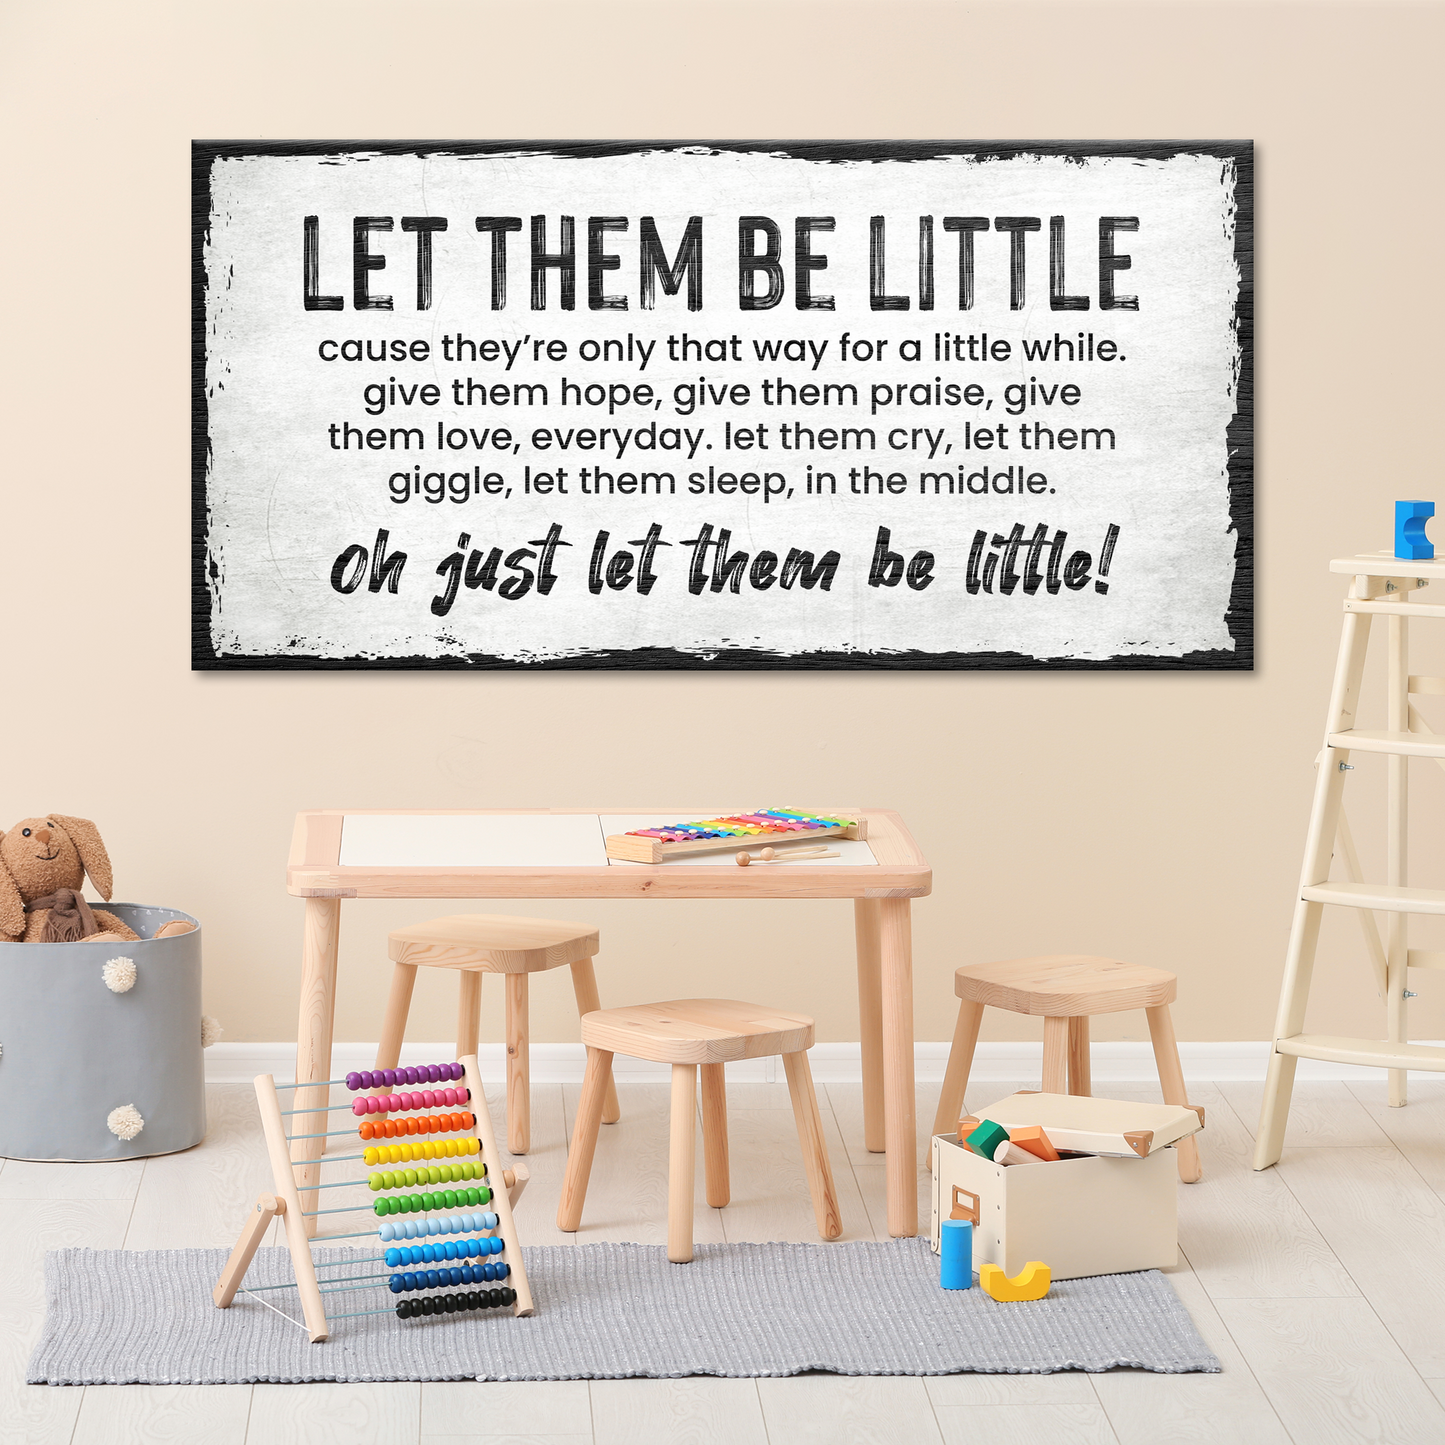 Let them be little Sign Style 2 - Image by Tailored Canvases